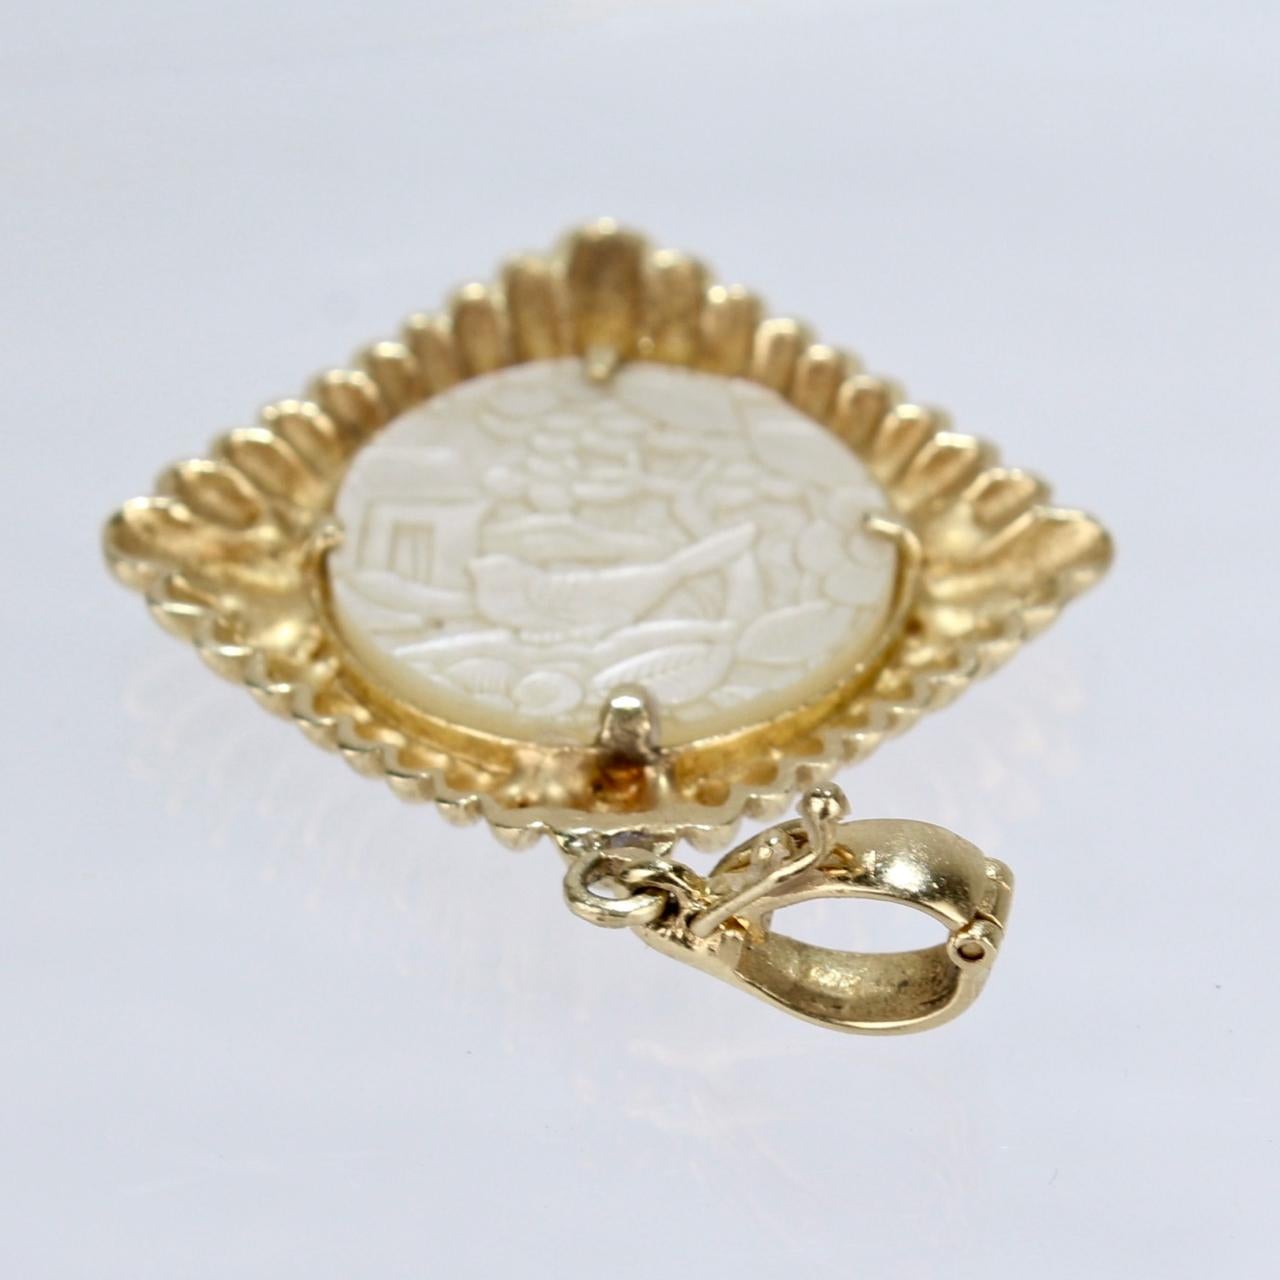 Women's or Men's 14 Karat Gold Pendant Set with a Chinese Carved Mother-of-Pearl Game Chip